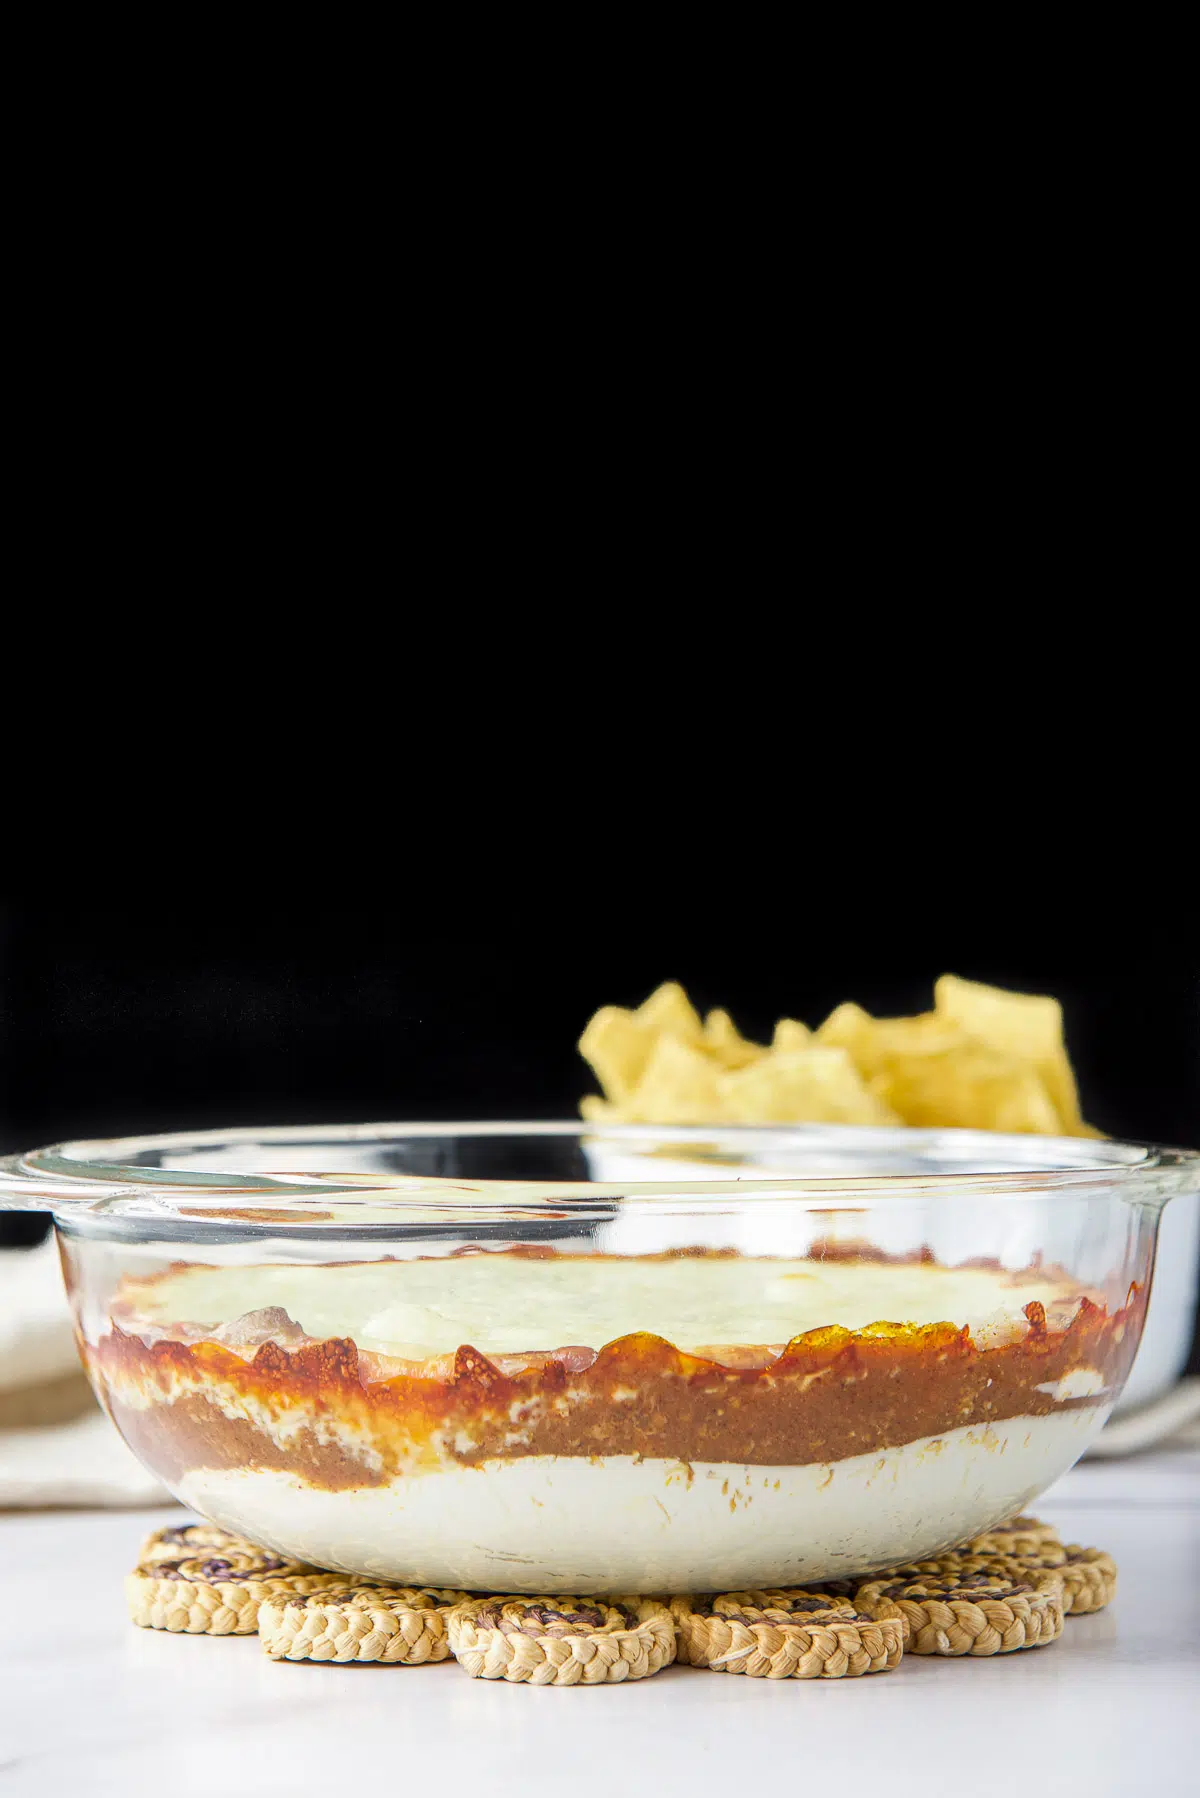 Vertical view of a casserole dish with the layered dip in it with chips in the back